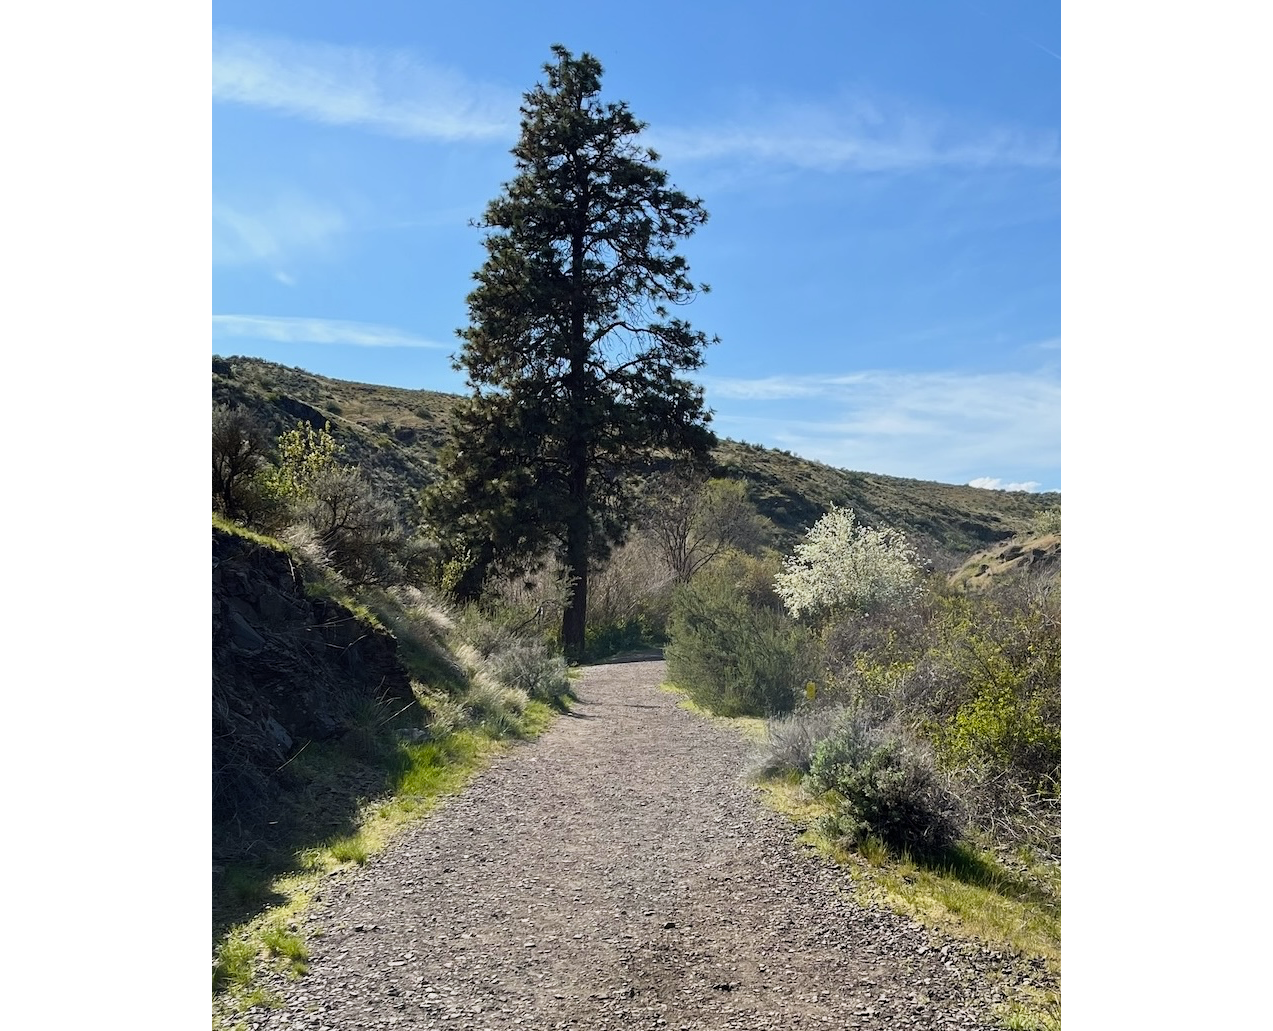 Photo of trail in canyon straight ahead, with pine tree midway on left, and white serviceberry tree on right